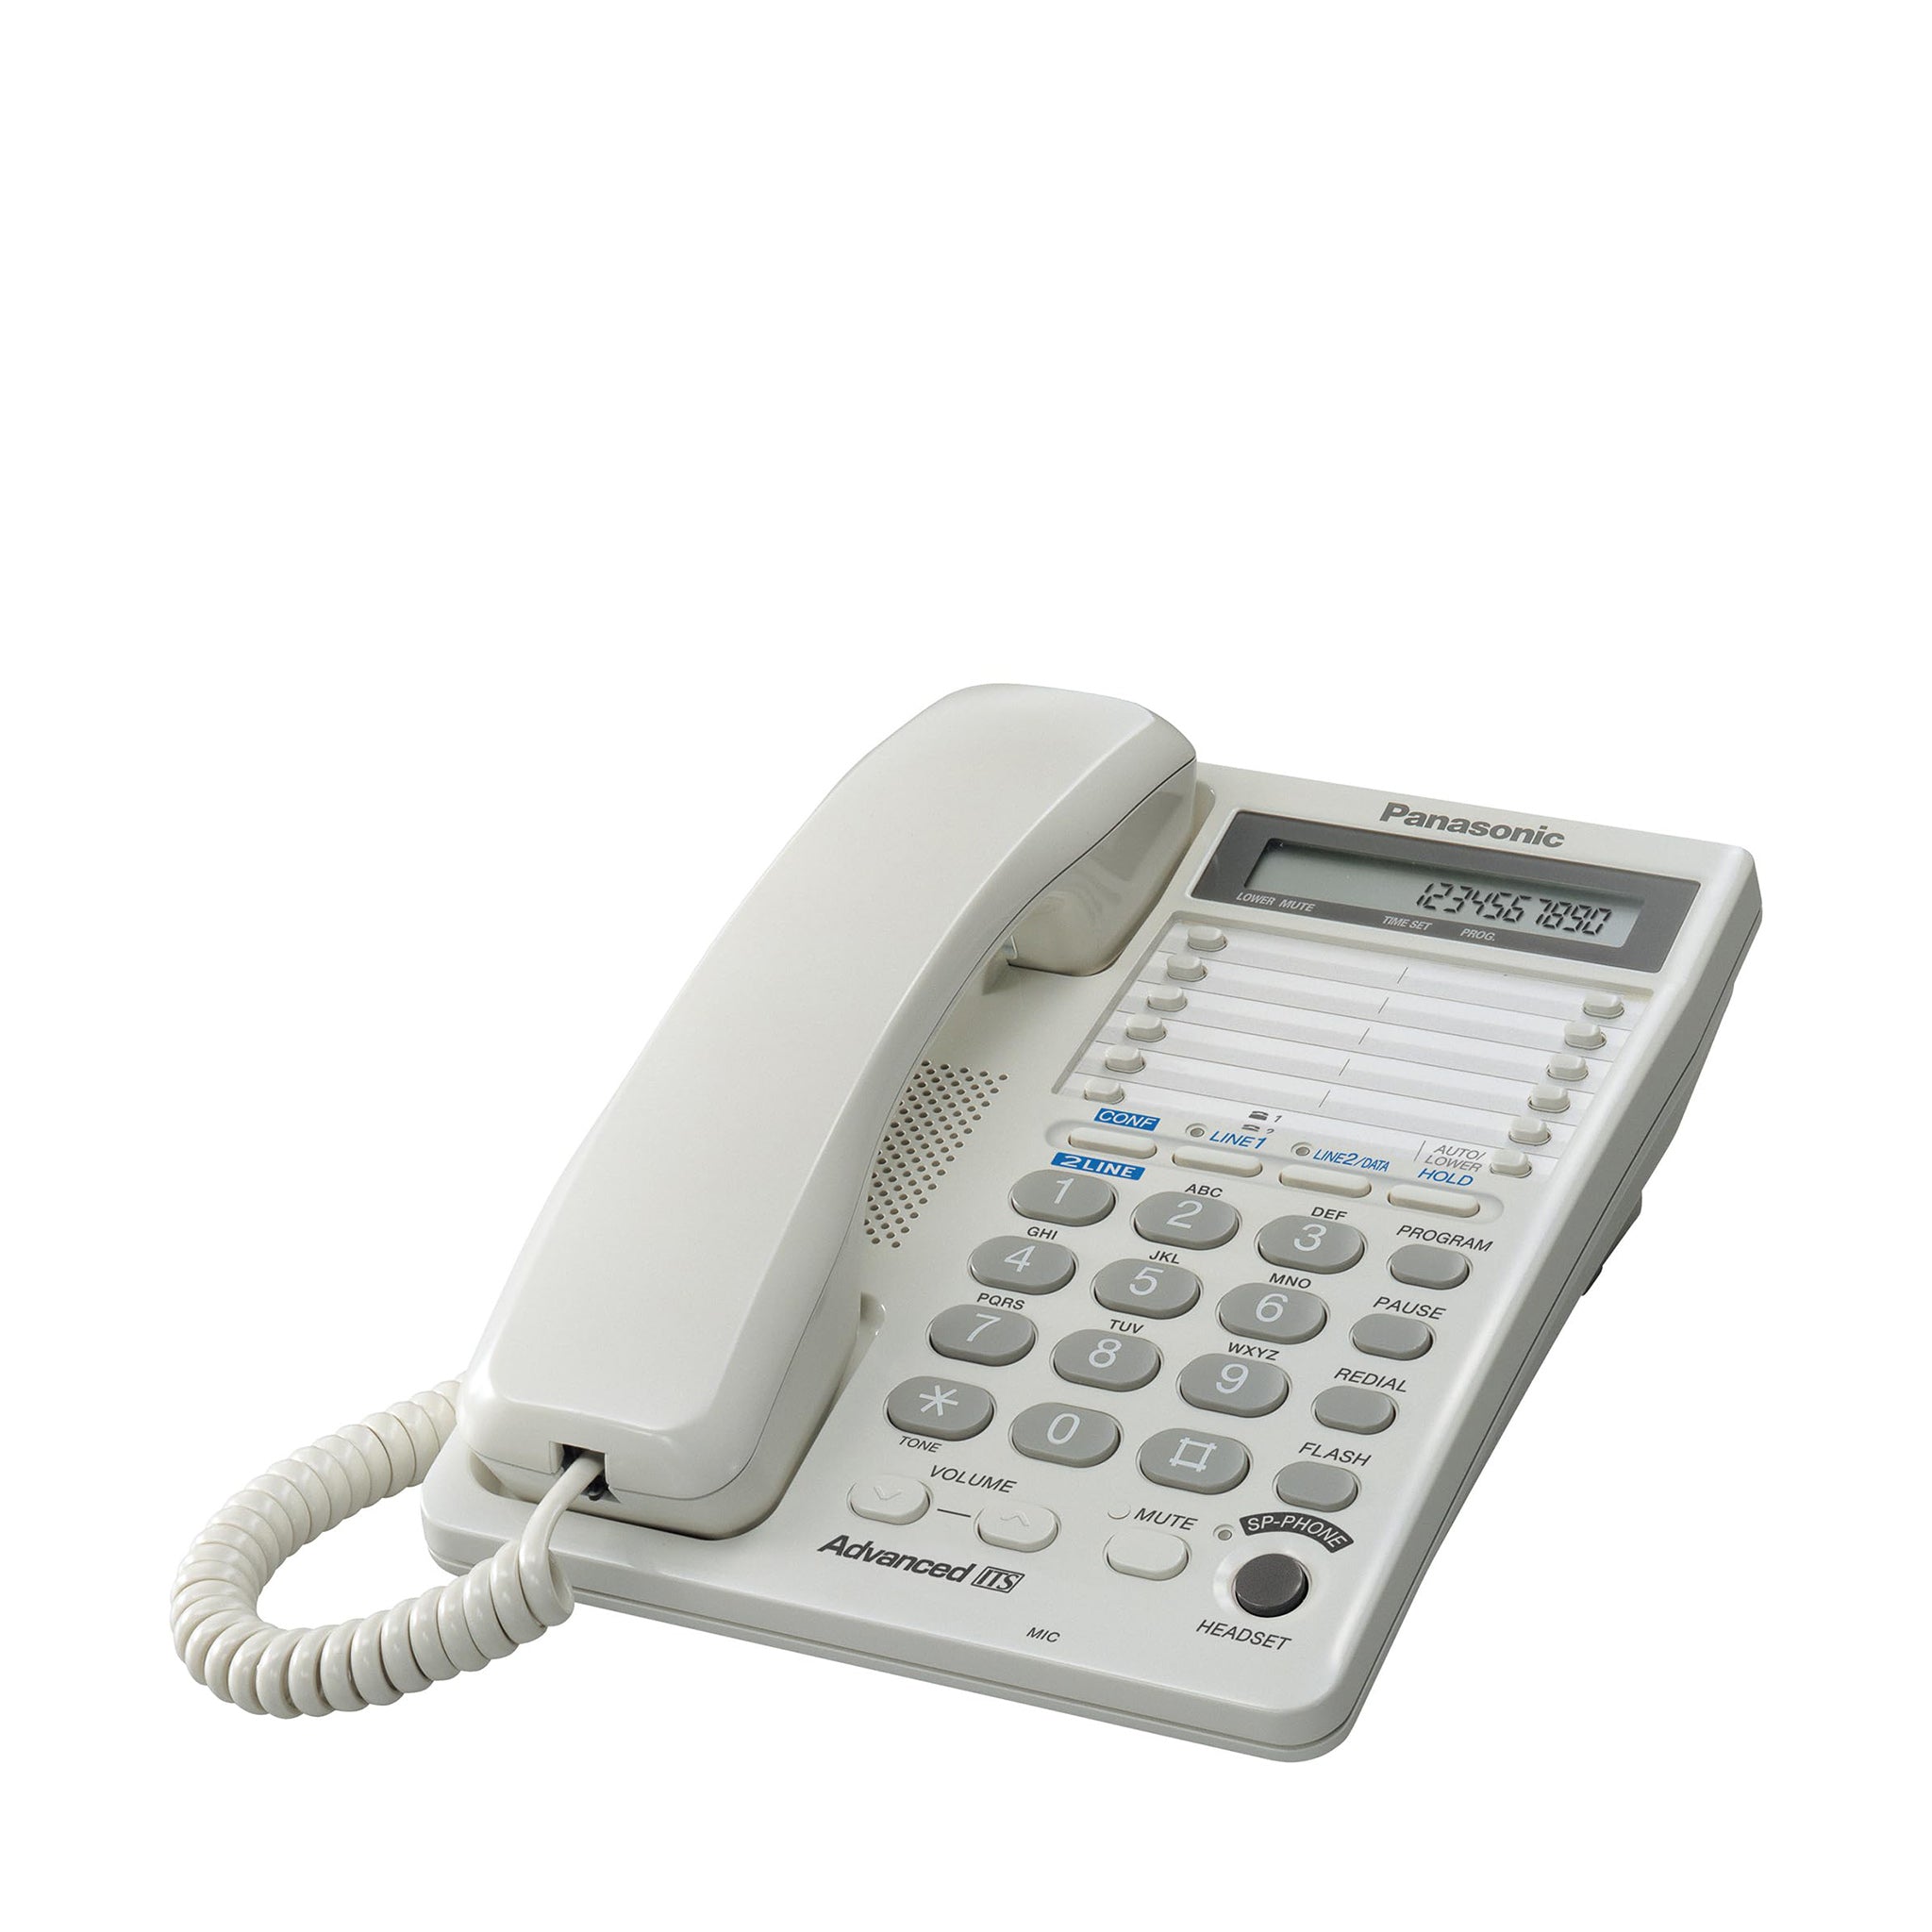 Panasonic Link2Cell Corded Phone System Answering Corded Handsets, 2 with KX-TGF382M - Machine Digital